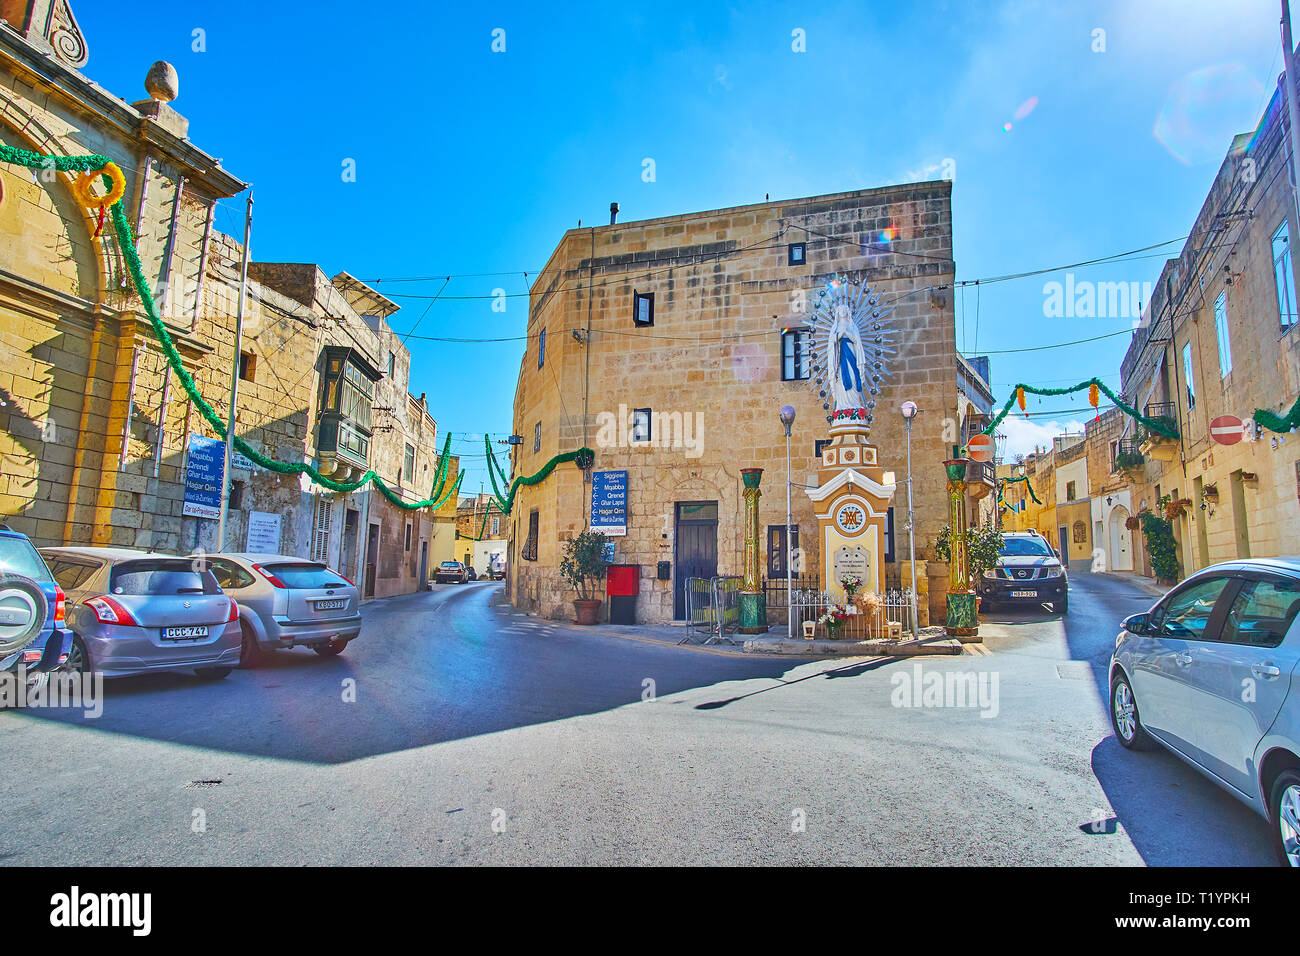 SIGGIEWI, MALTA - JUNE 16, 2018: The statue of Virgin Mary decorates the small square of St Margarita, located in old town, on June 16 in Siggiewi Stock Photo